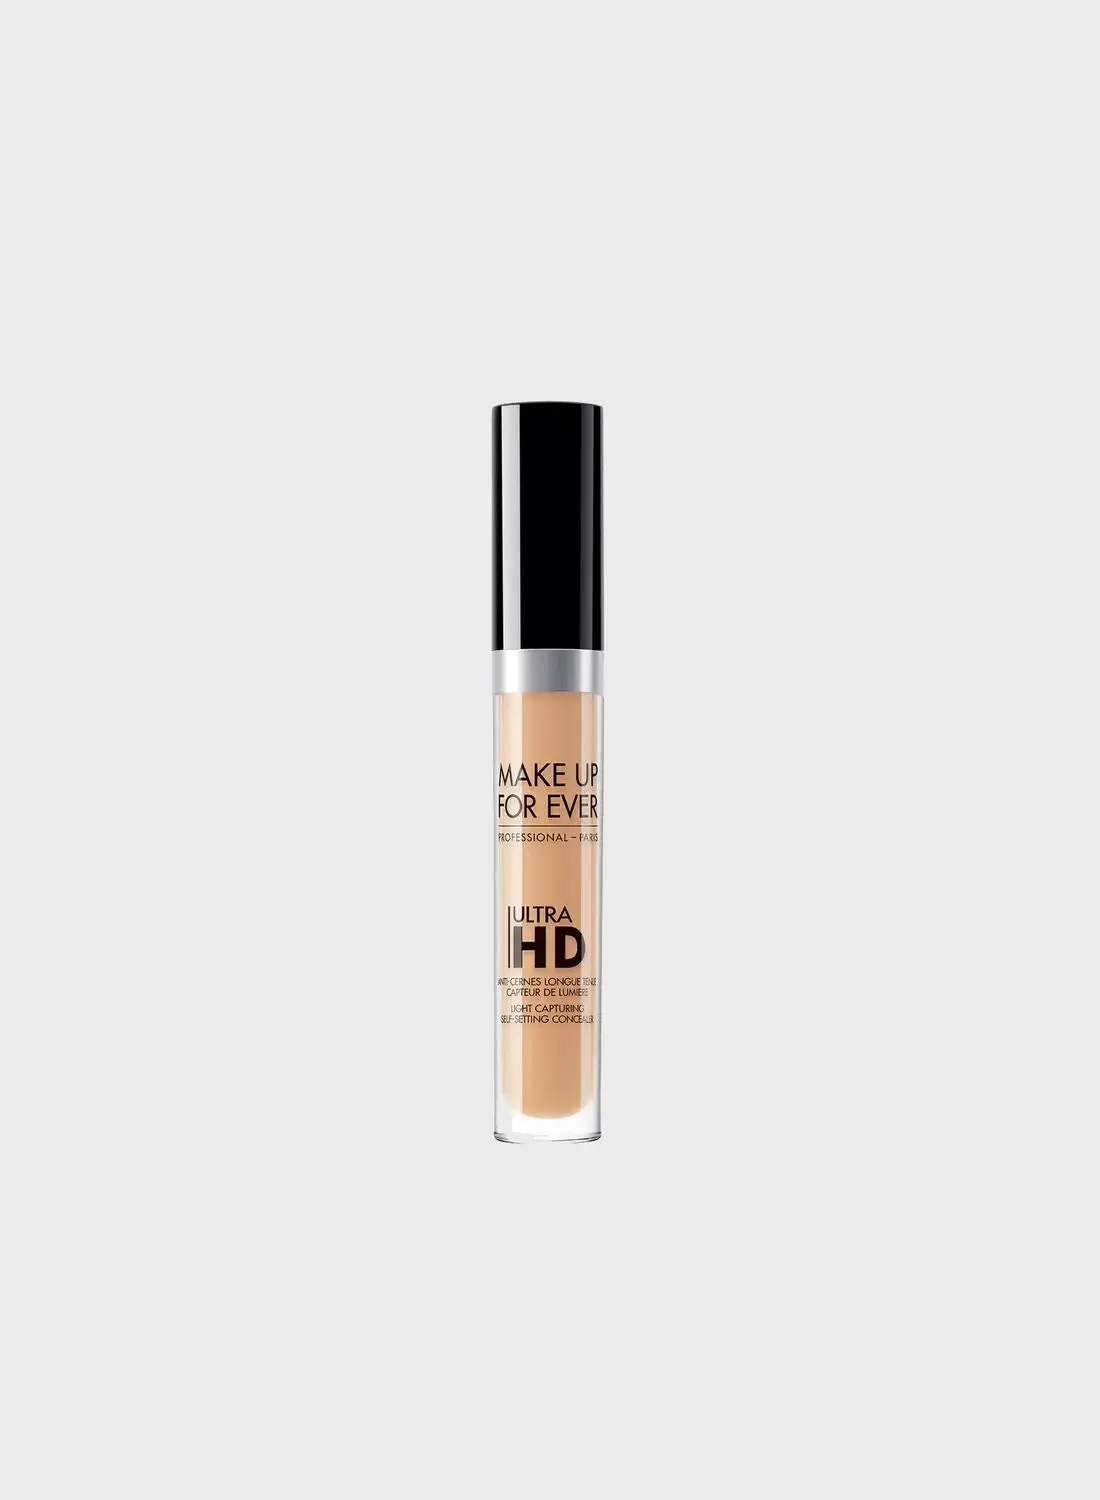 MAKE UP FOR EVER Ultra HD Concealer - 31 Macadamia